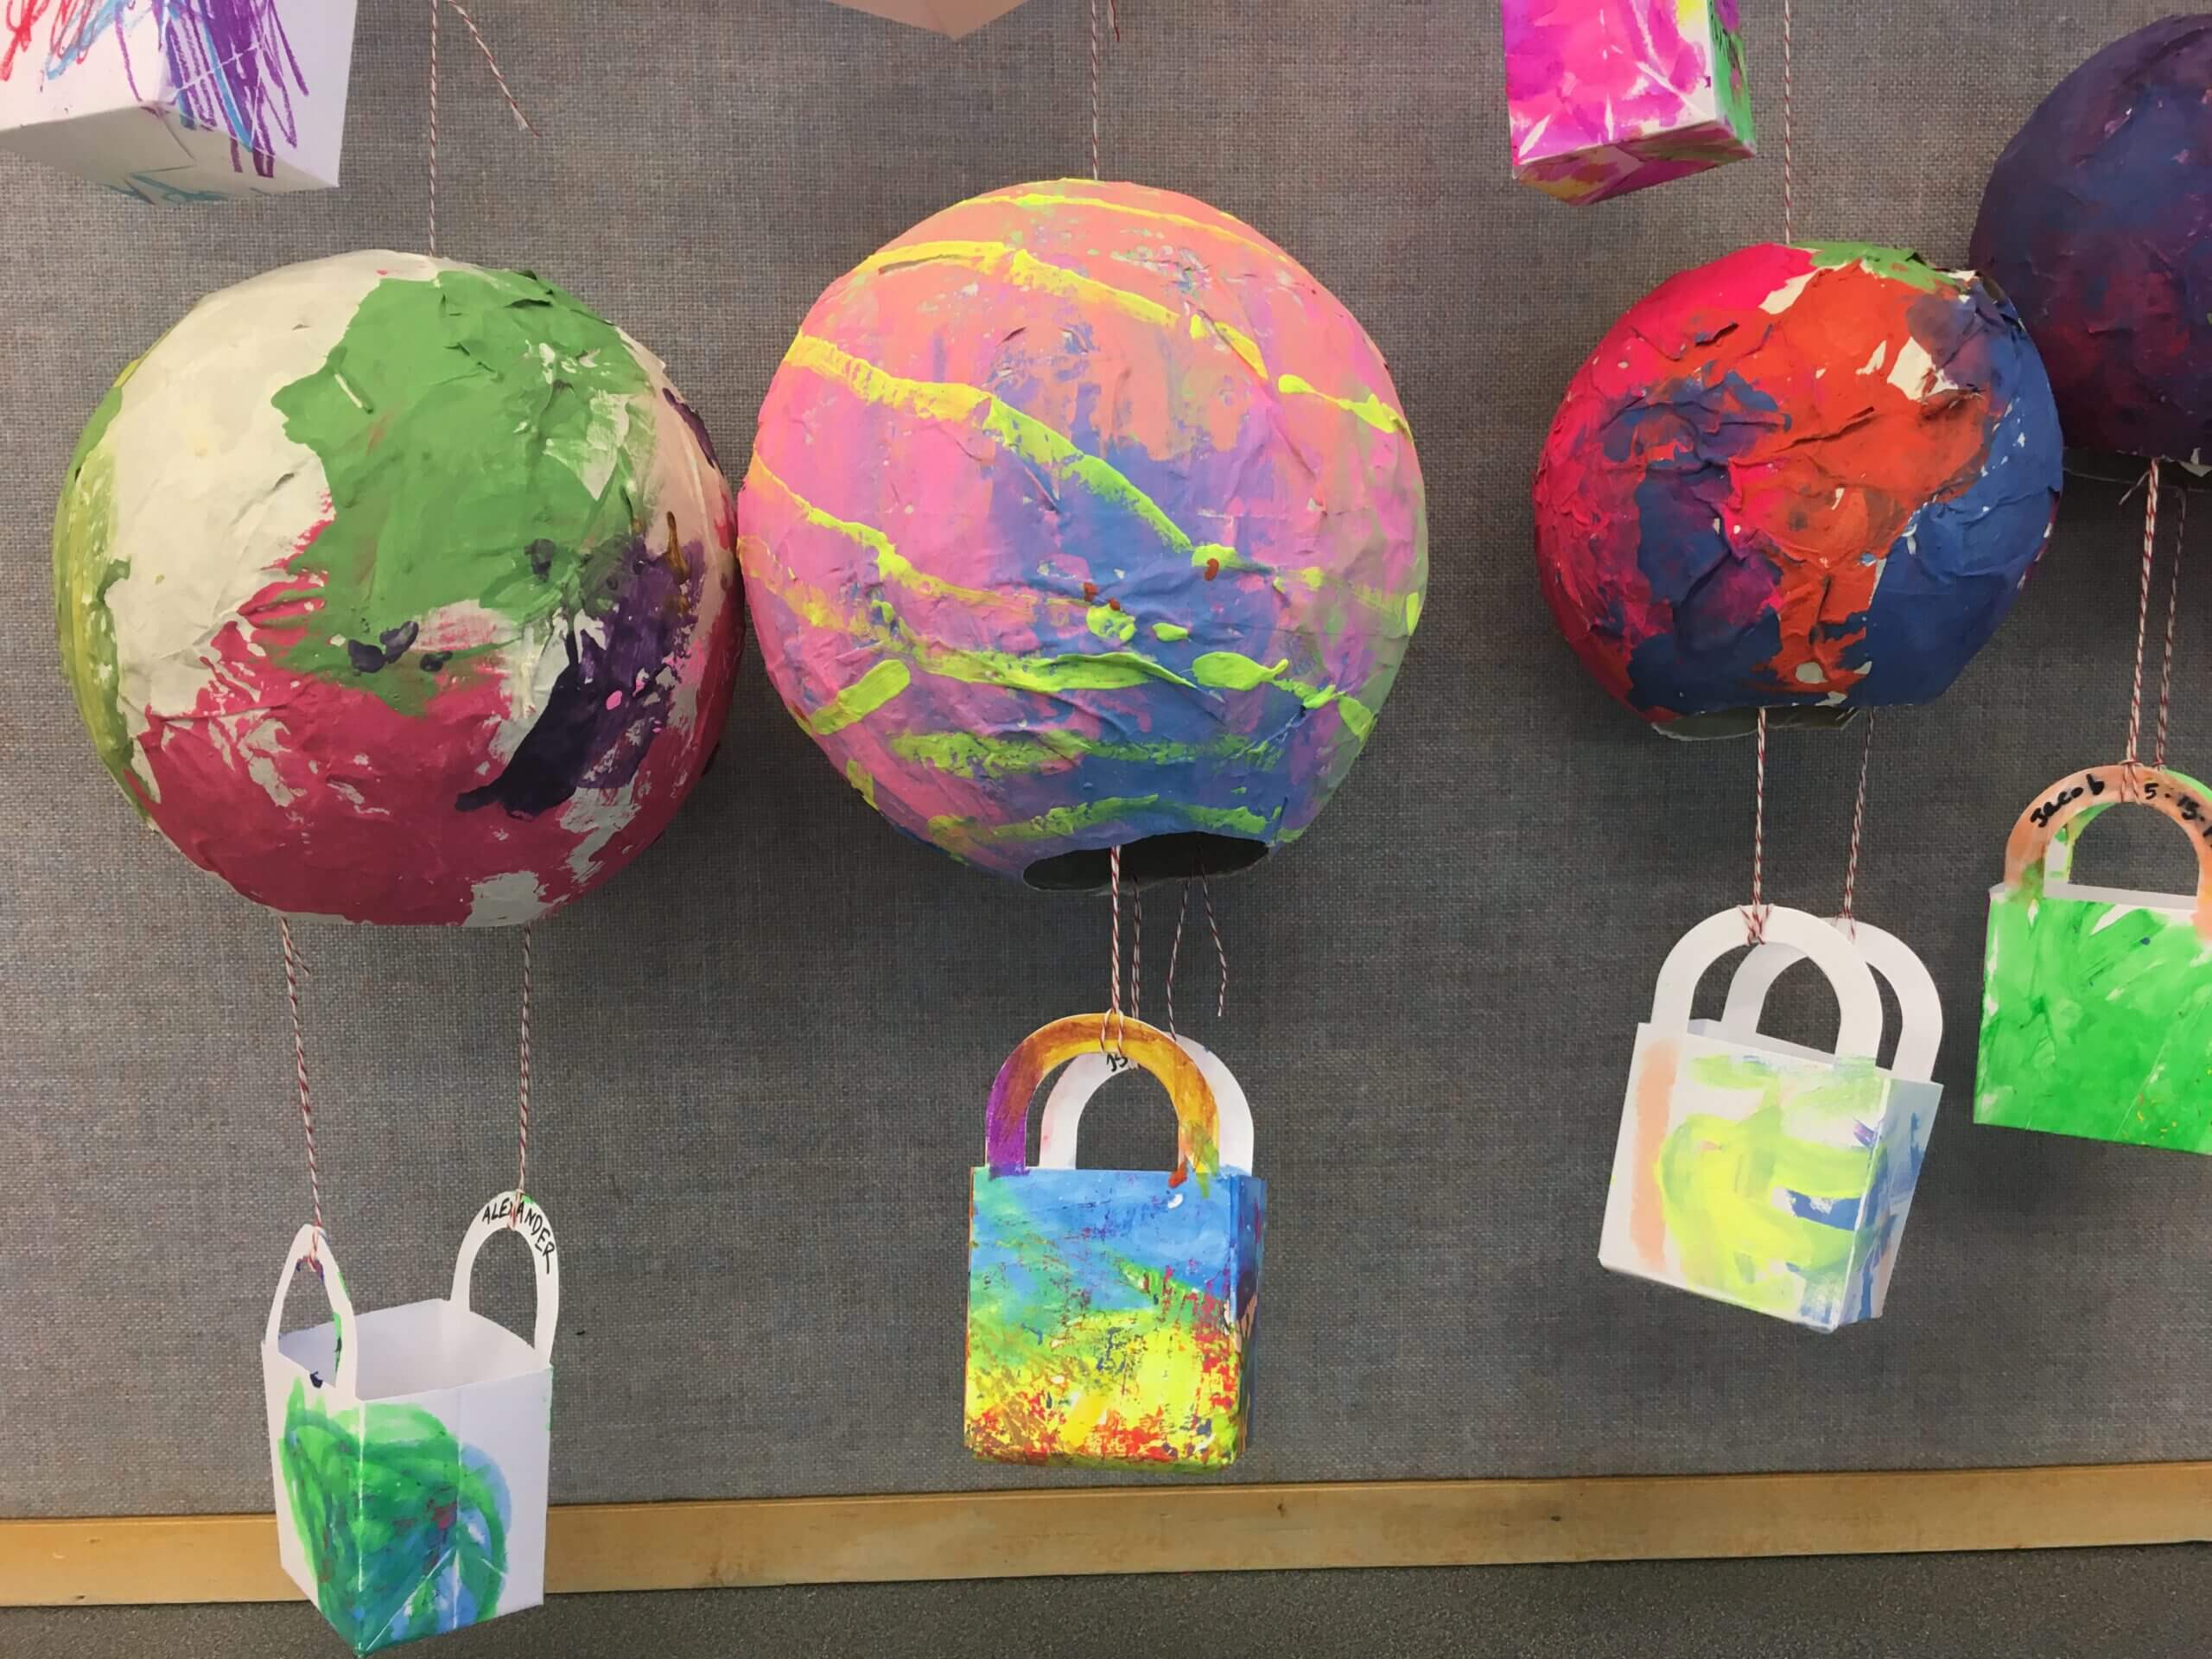 Paper Mache Hot Air Balloon Using Paper Strings and Paper Baskets